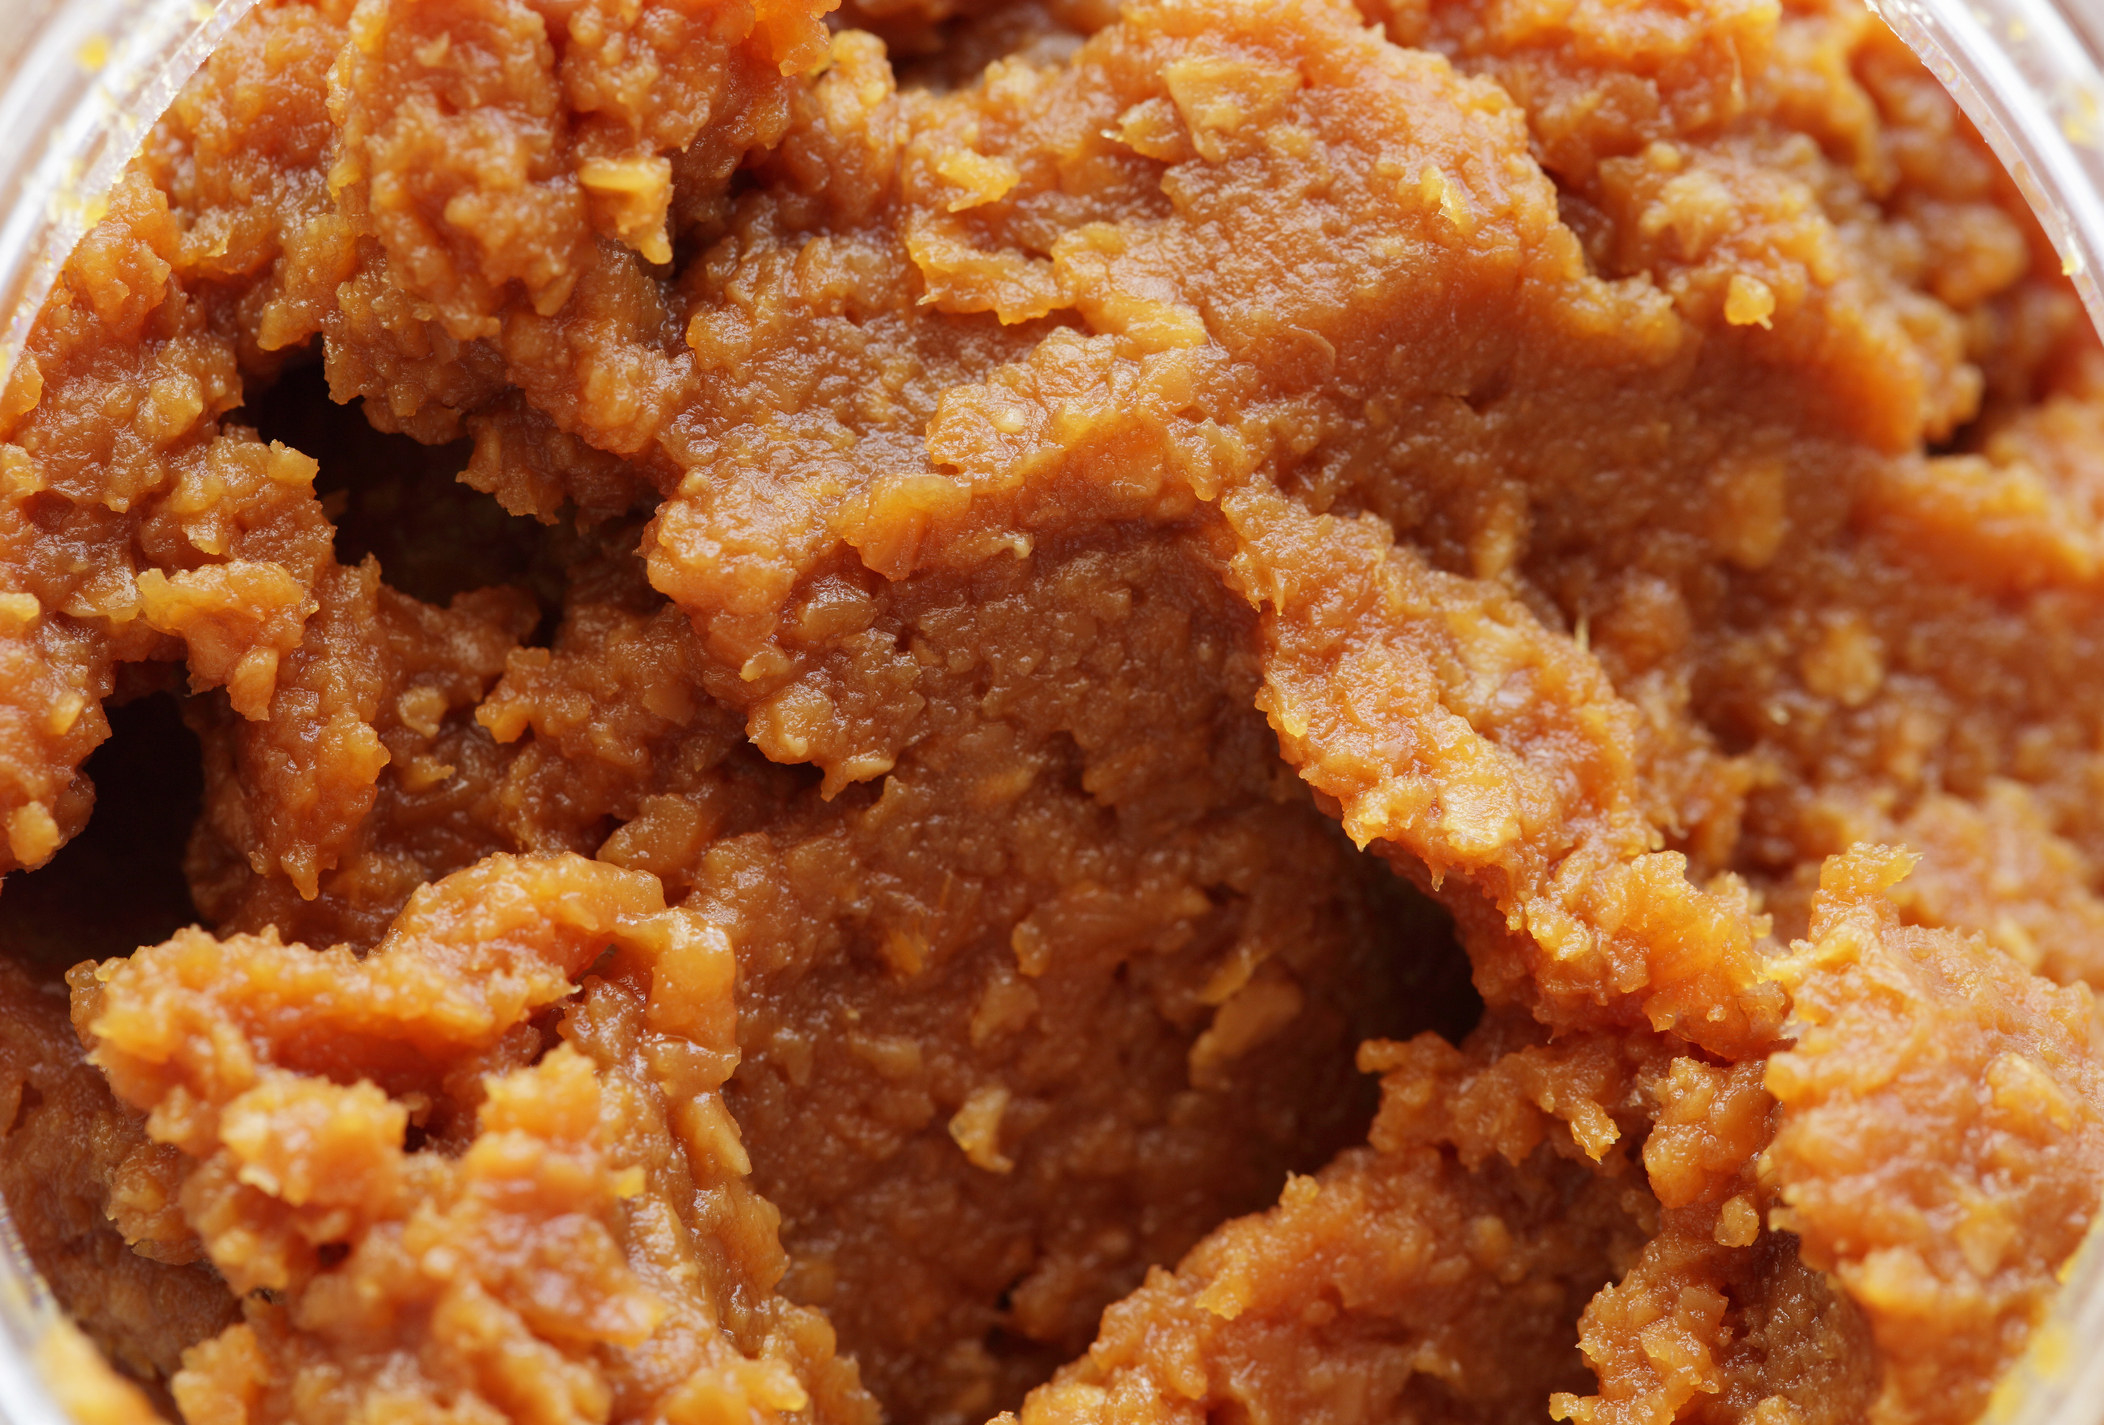 A close-up of miso paste